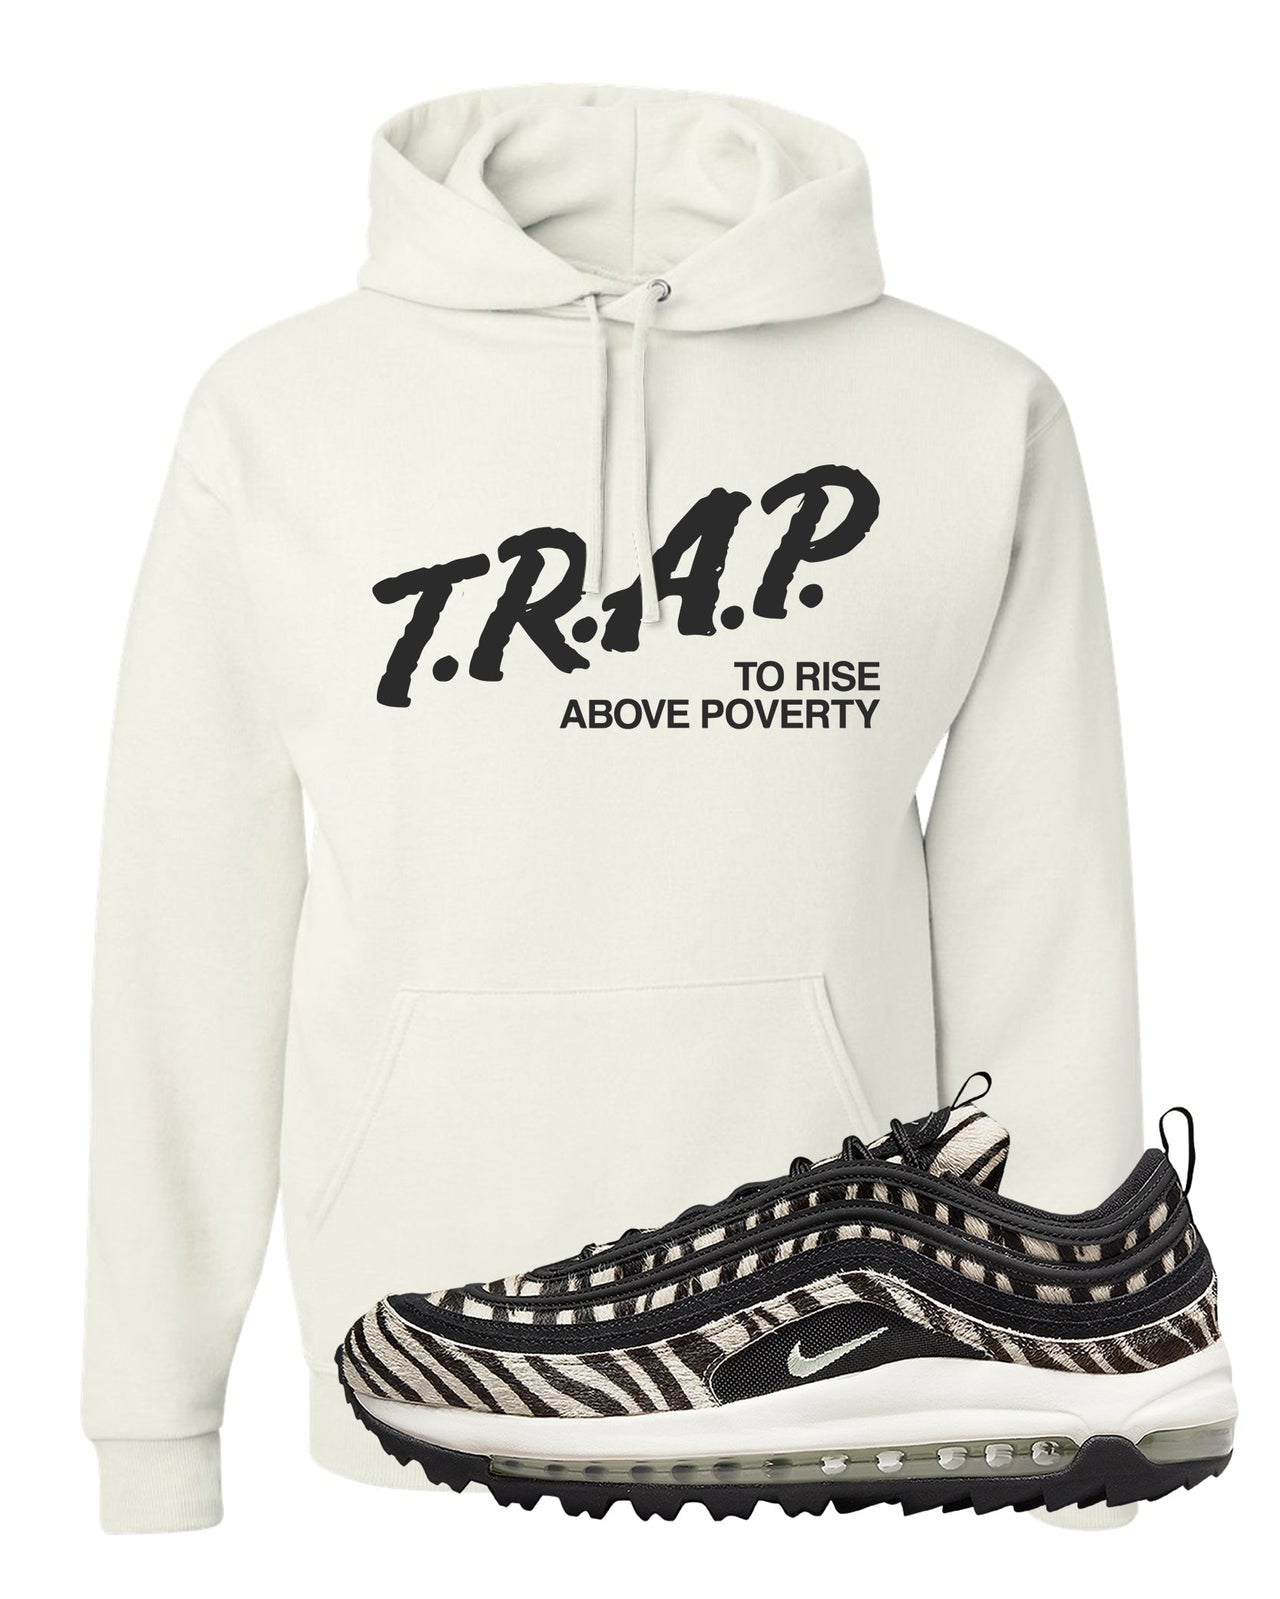 Zebra Golf 97s Hoodie | Trap To Rise Above Poverty, White